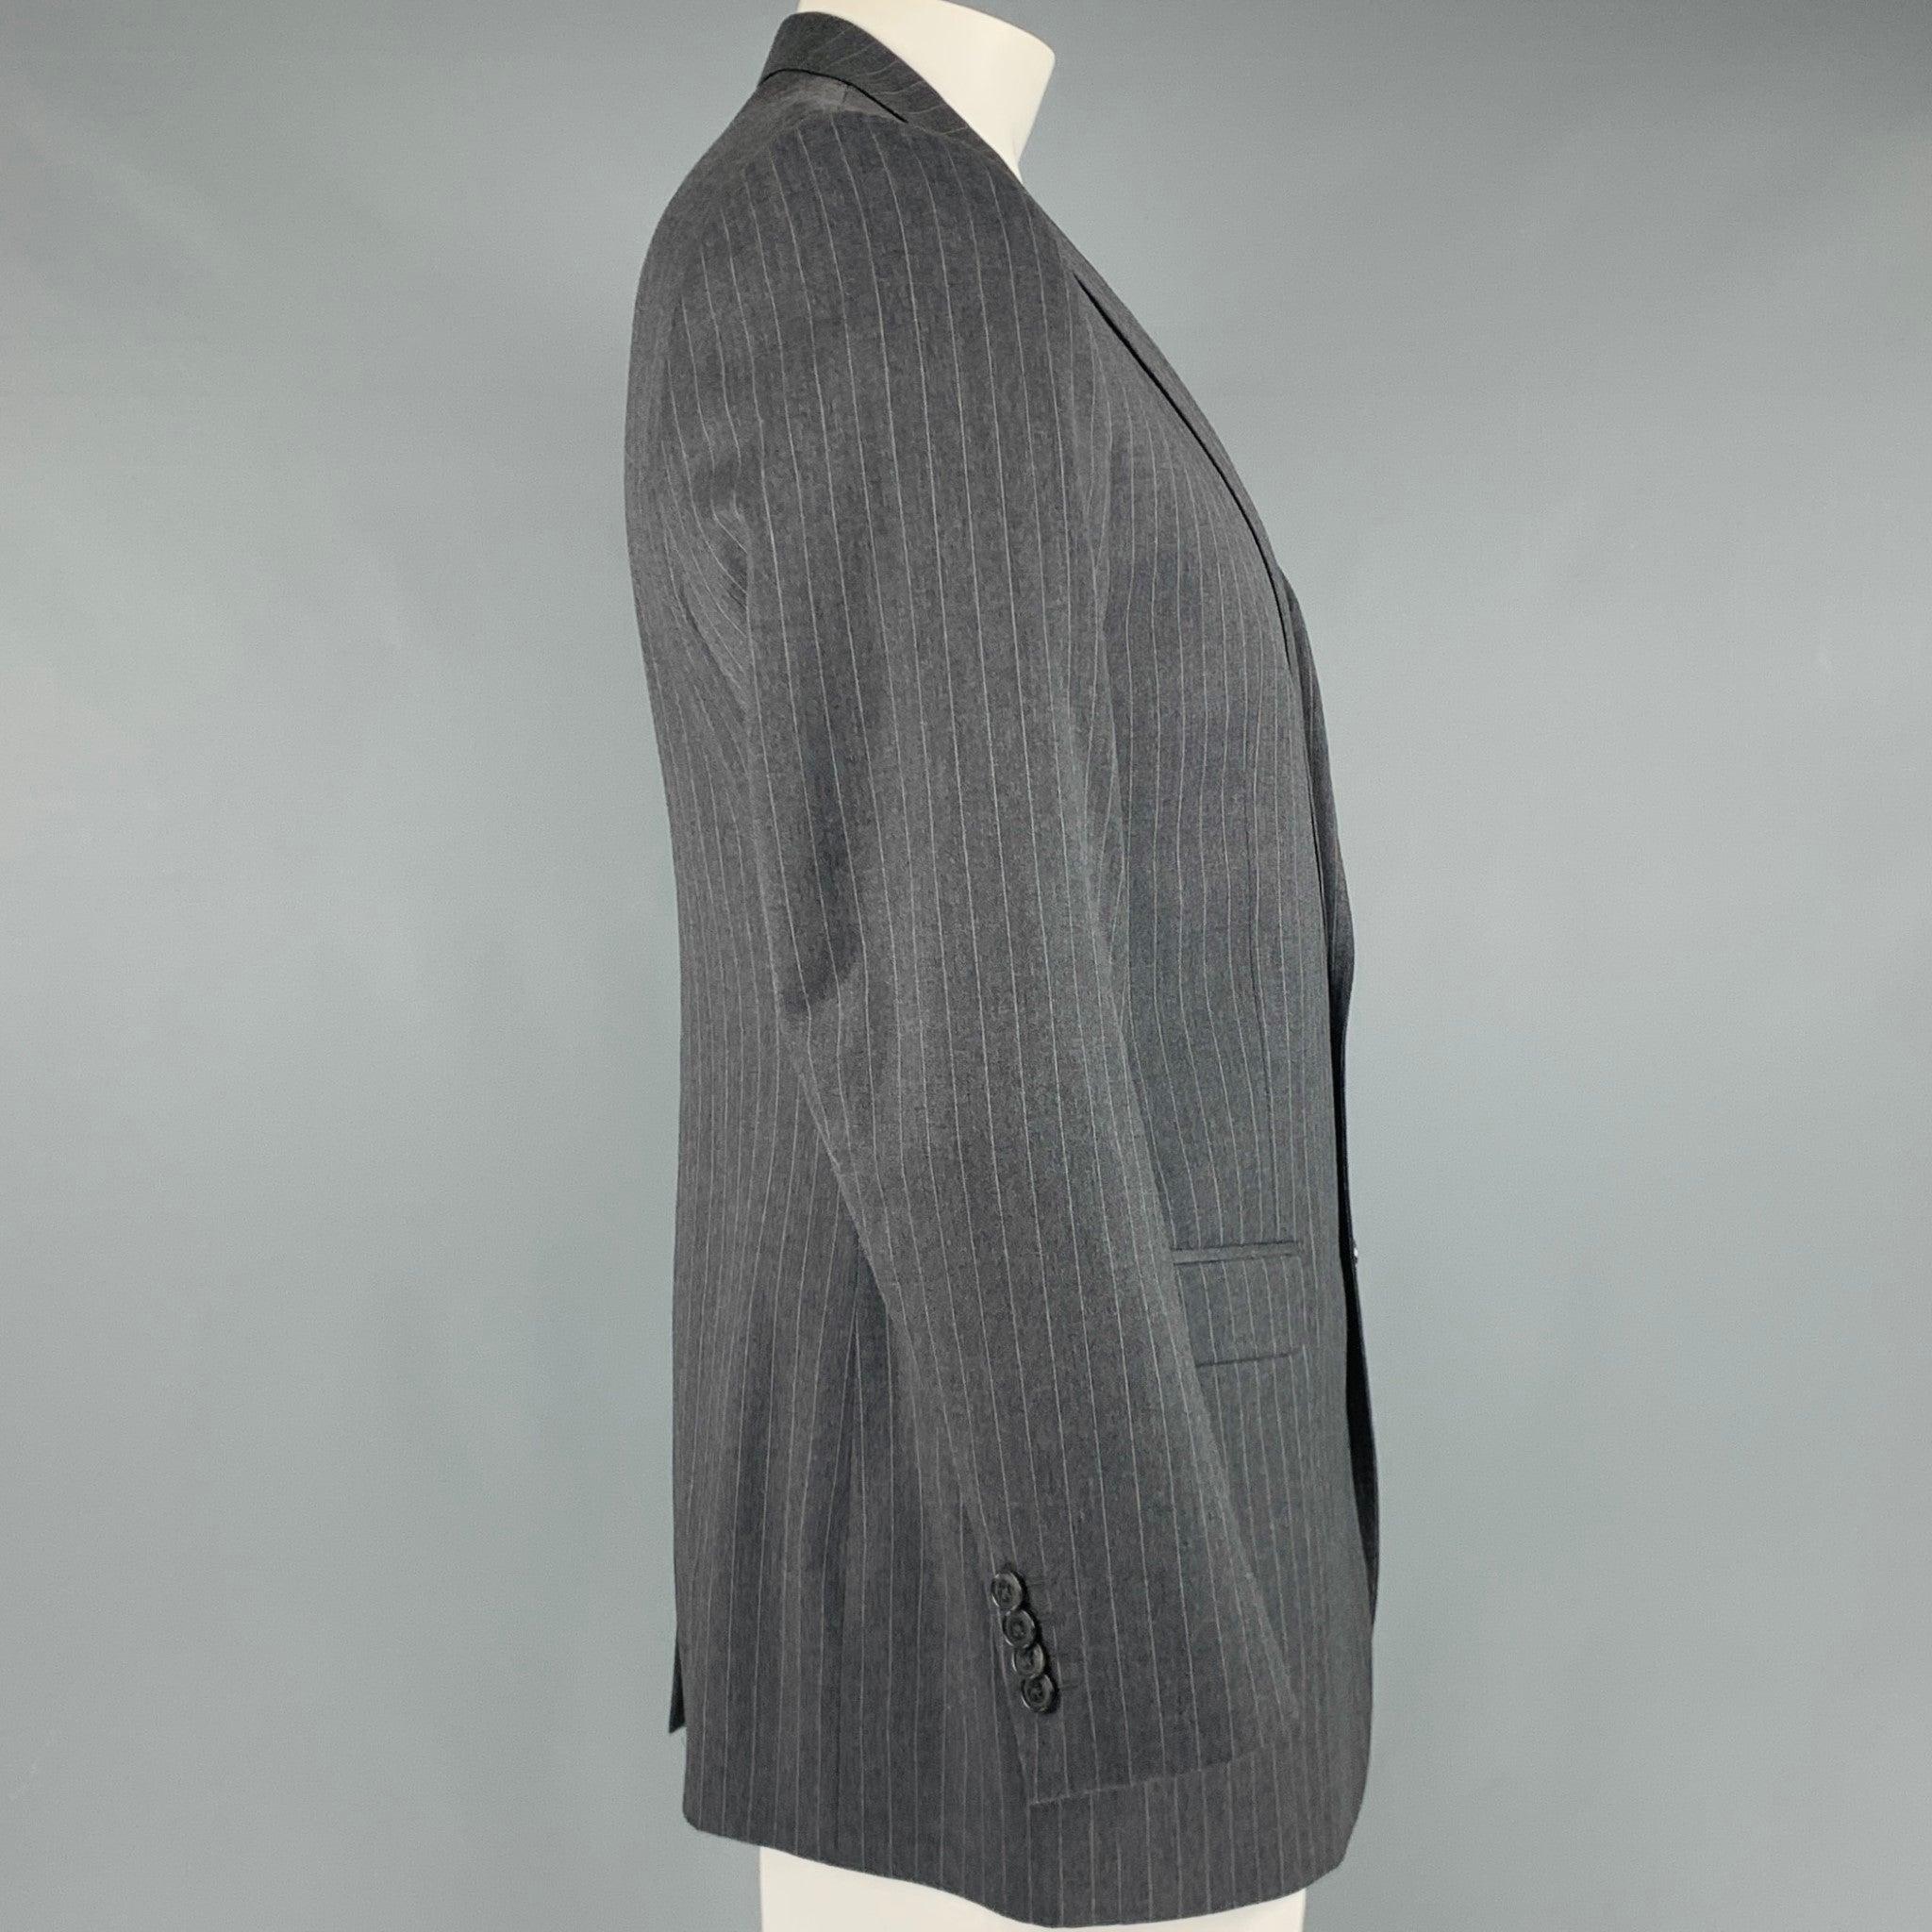 DOLCE & GABBANA sport coat
in a grey and white virgin wool fabric featuring a pinstripe pattern, notch lapel, and double button closure. Made in Italy.Excellent Pre-Owned Condition. 

Marked:   52 

Measurements: 
 
Shoulder: 18 inches Chest: 42